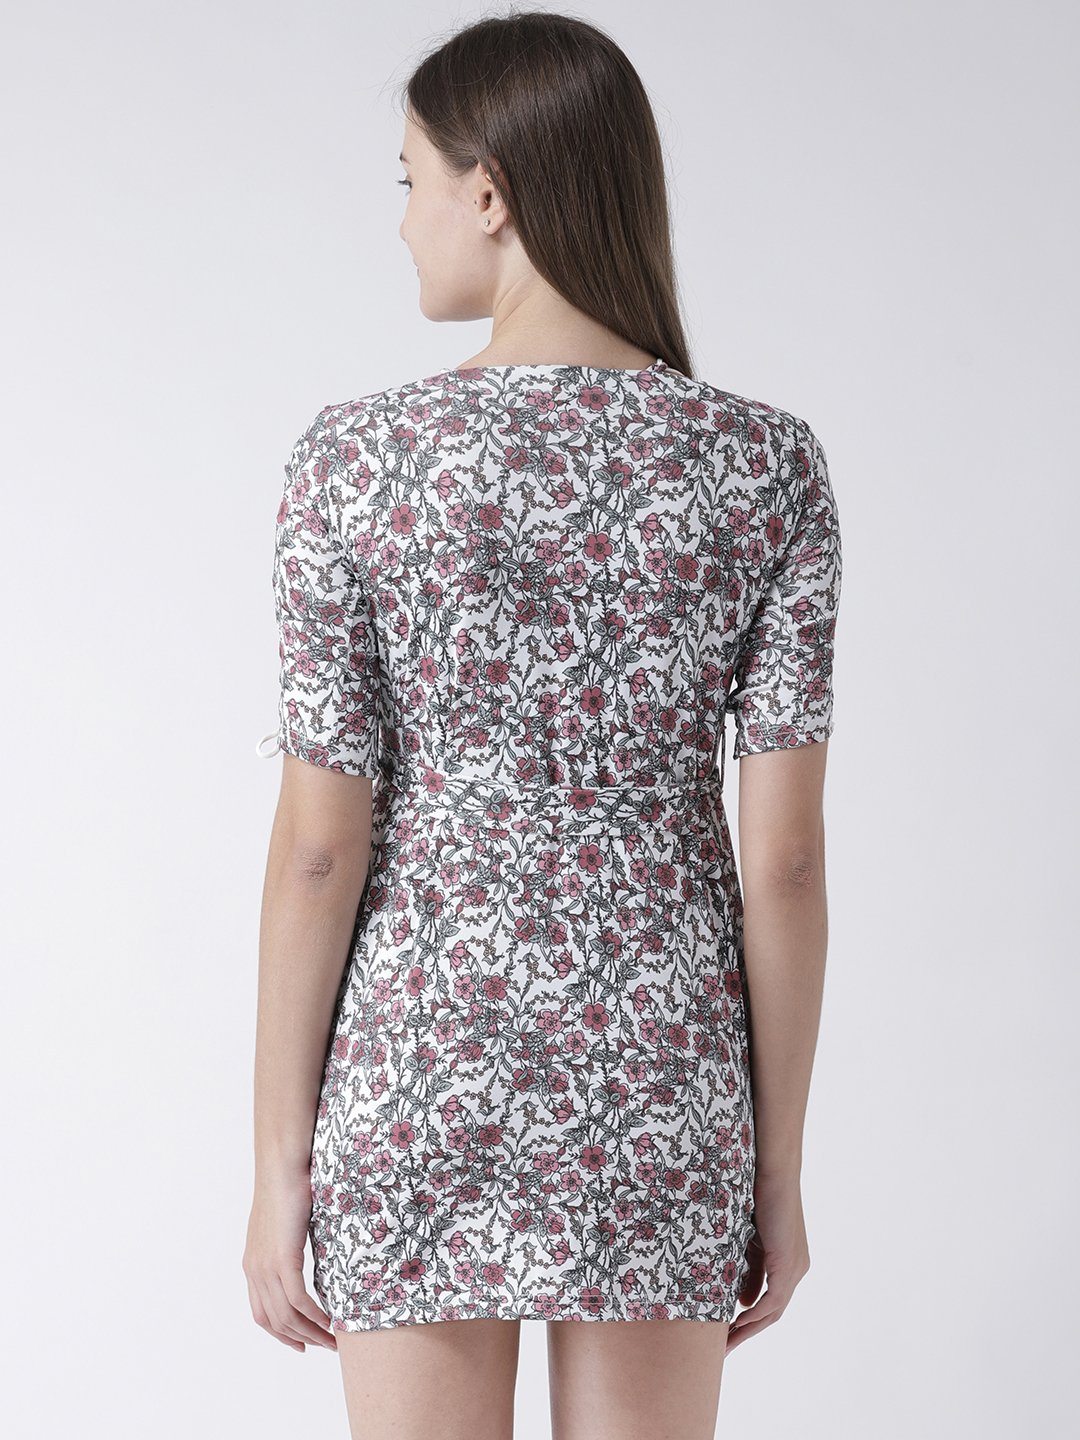 Floral Printed Tunic with Shoulder Tie-Up Detail